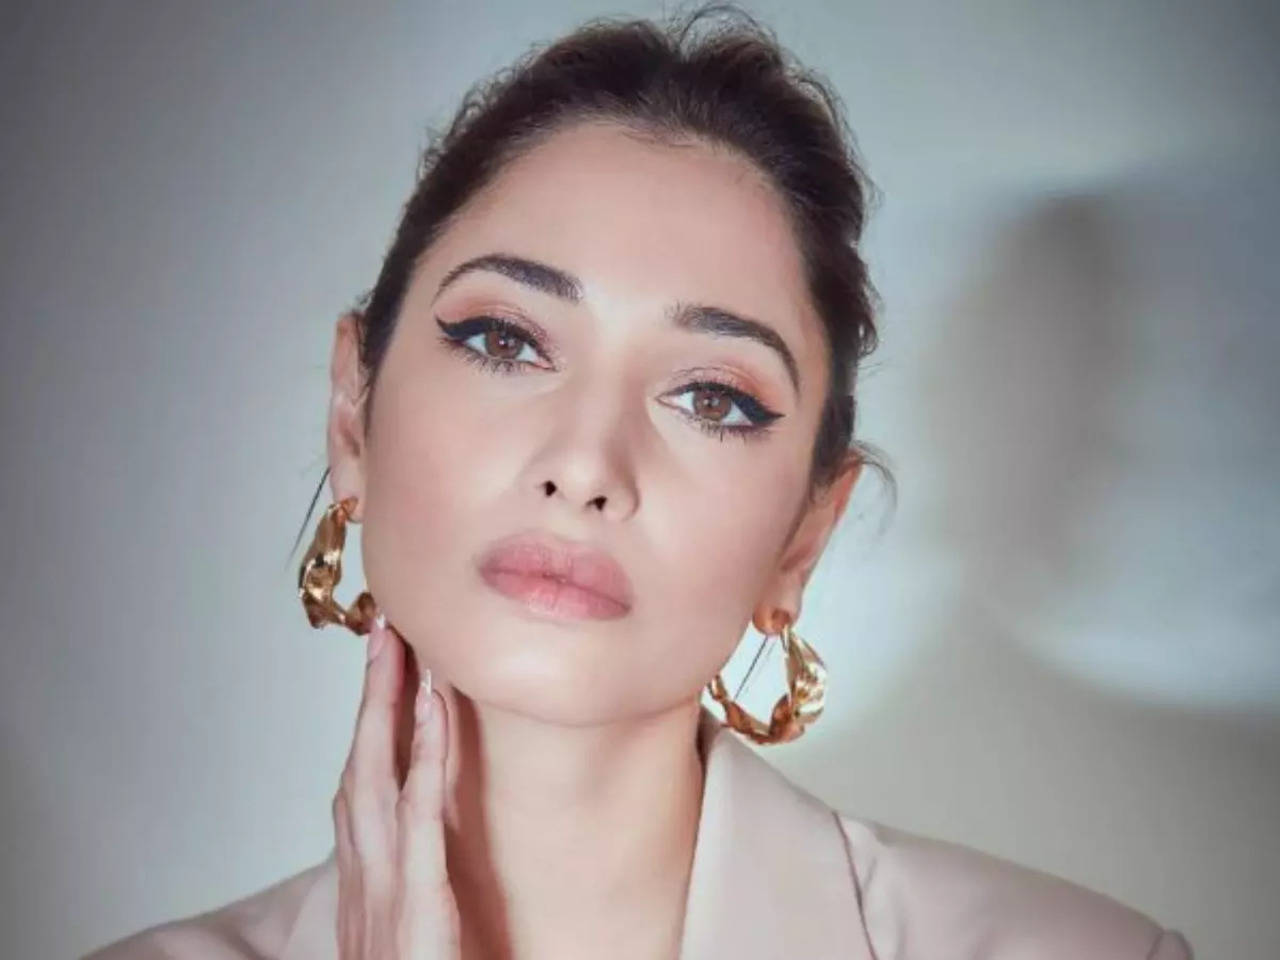 Tamannaah Bhatia just dropped her beauty routine photo